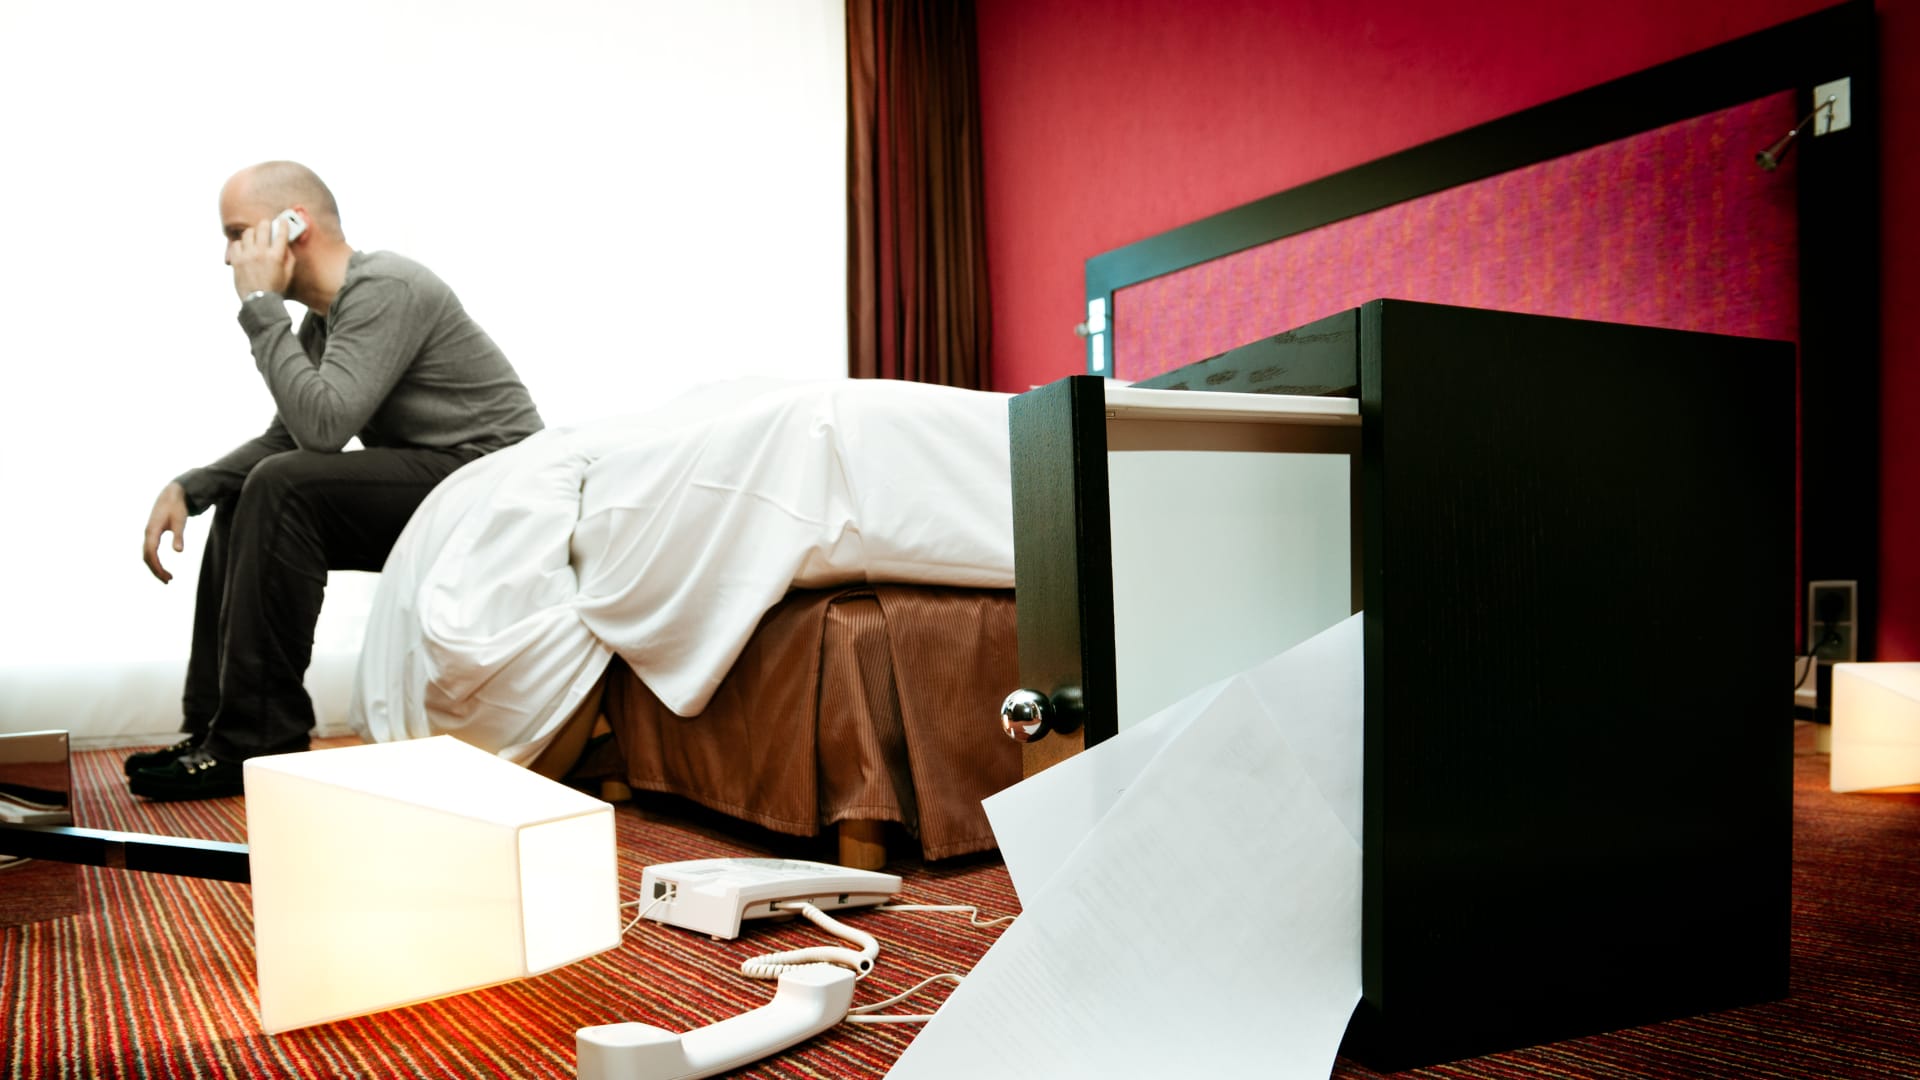 The most common crime in UK hotels isn’t theft